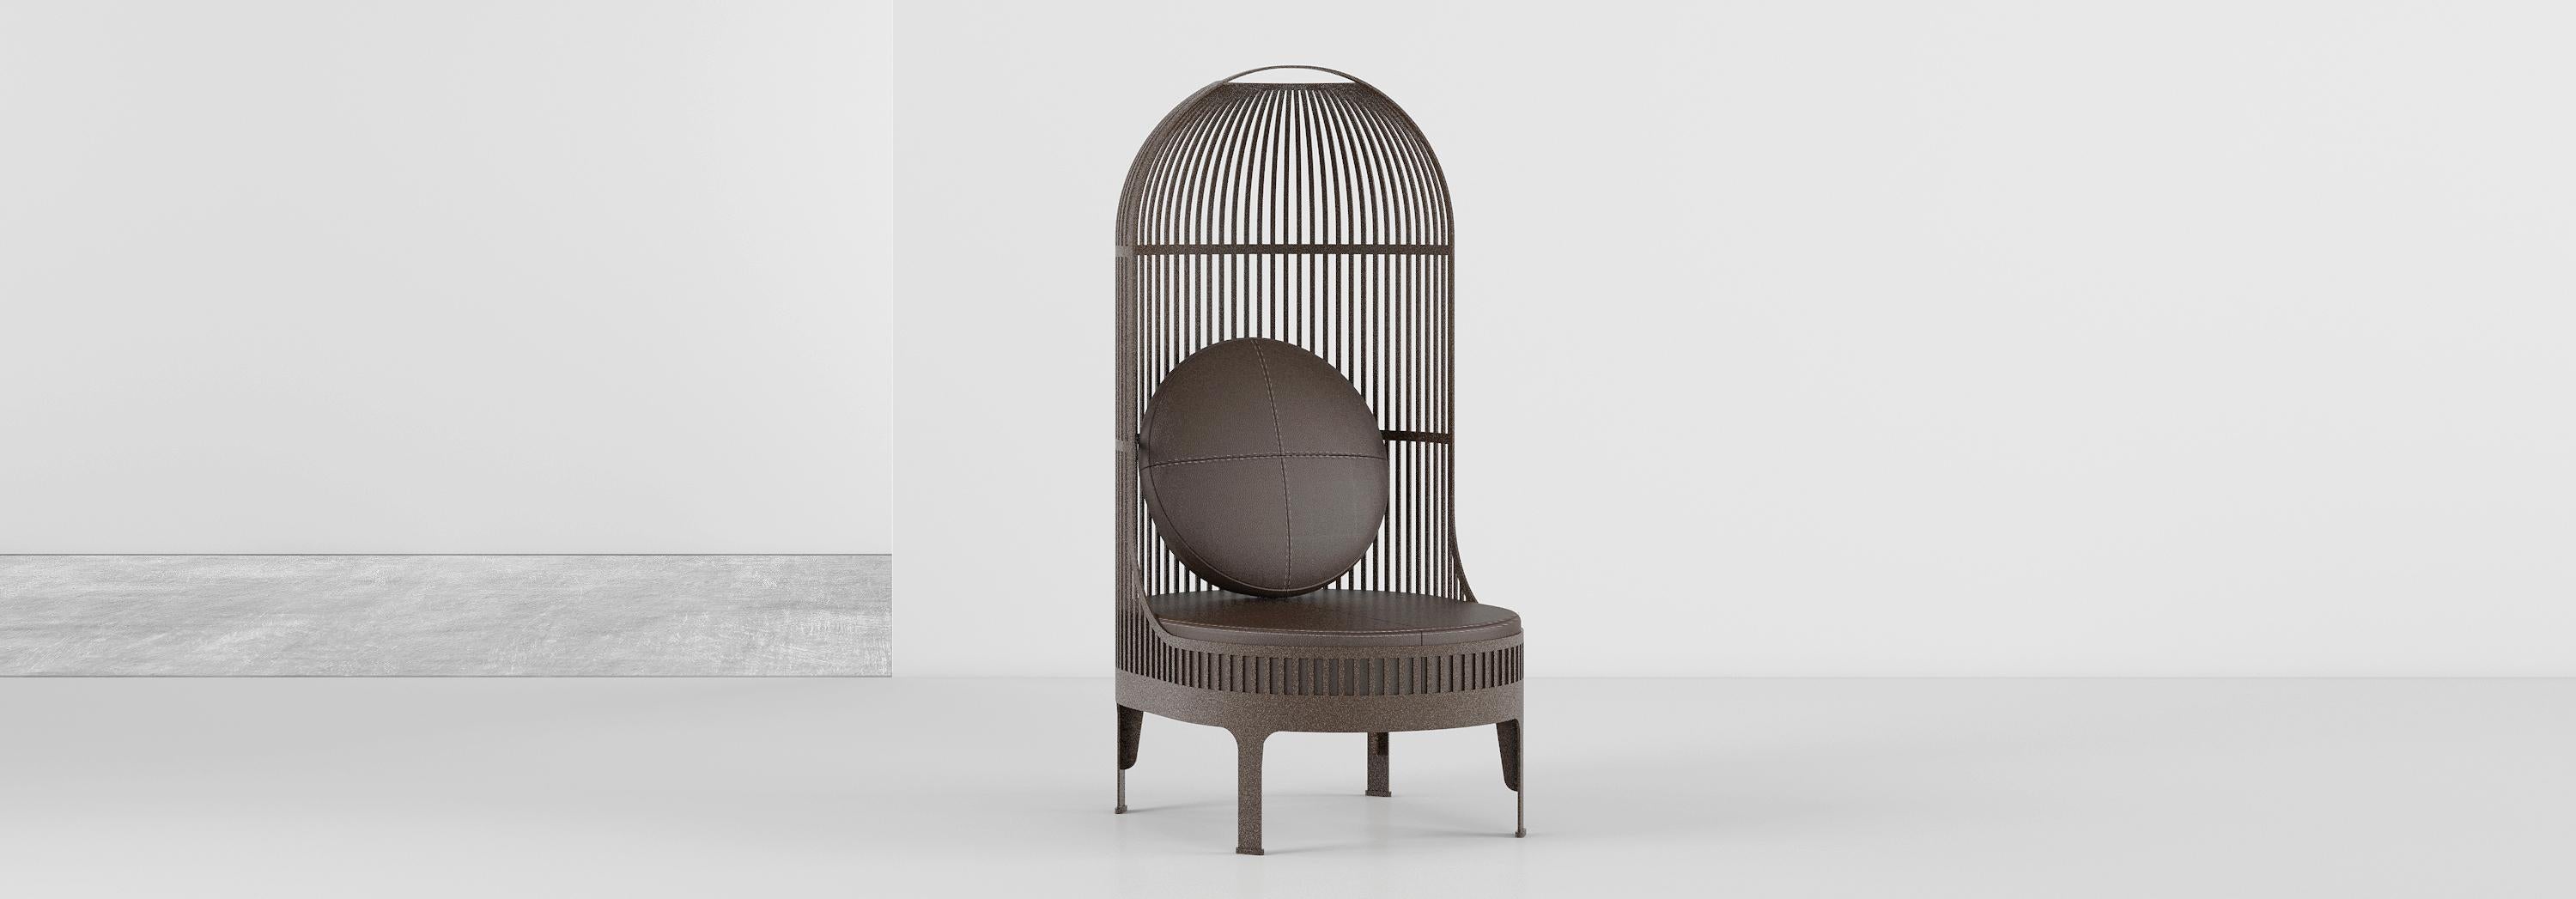 Creating spaces within spaces is a recurring theme in Autoban’s interior work, which can also be clearly observed in the studio’s approach to product design, particularly at the Nest series with the products’ tall, cage-like wooden slats creating a